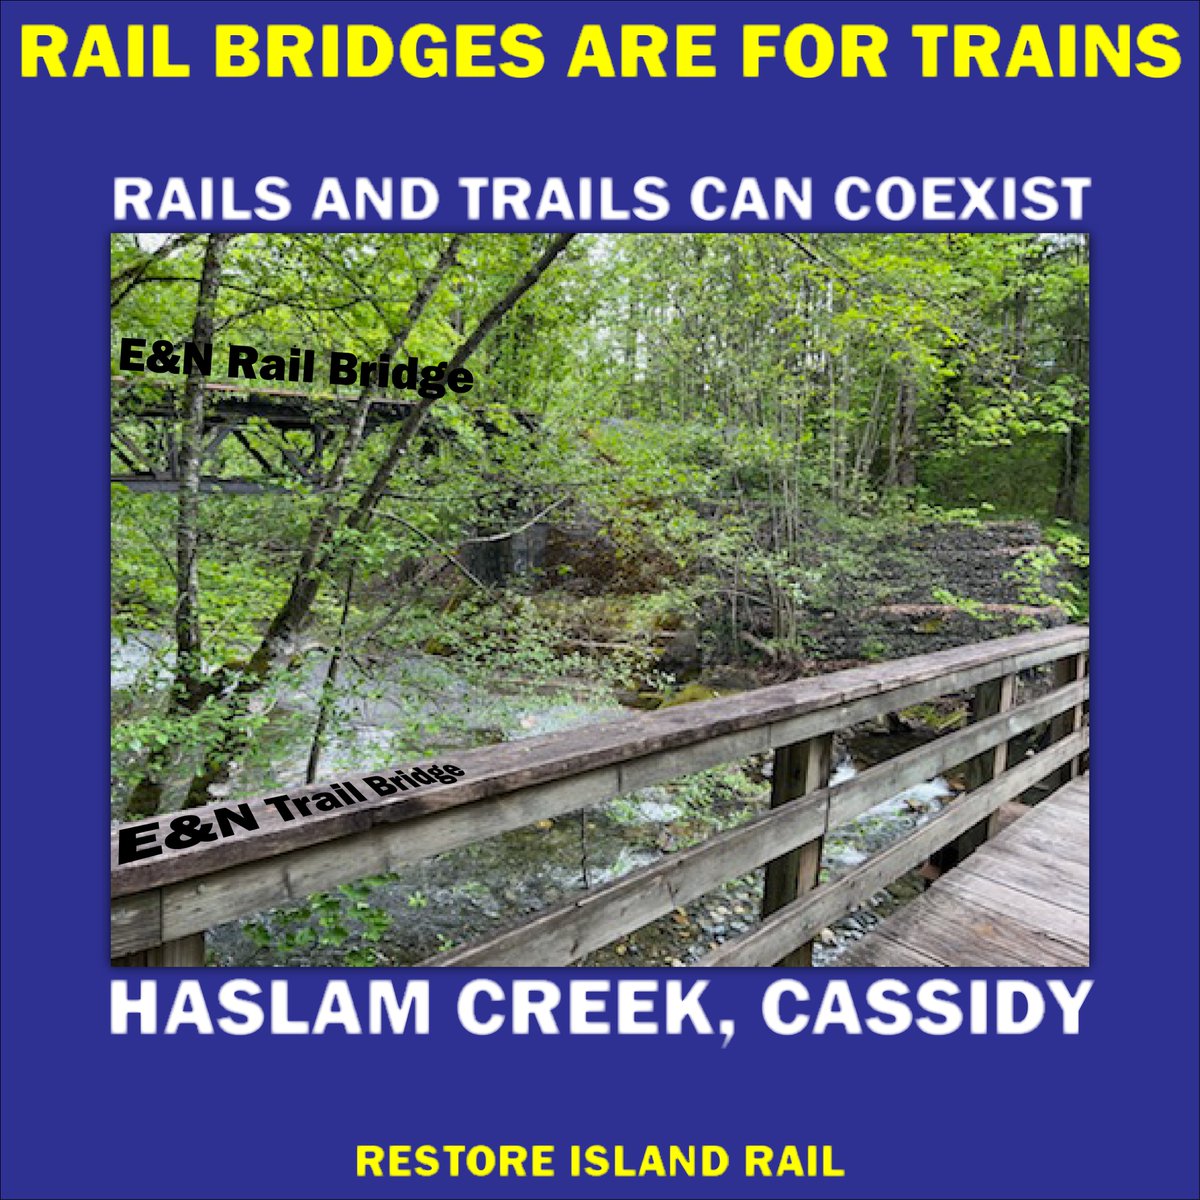 RAIL BRIDGES ARE FOR TRAINS

Rails and trails can coexist, this photo is from Haslam Creek, Cassidy right beside Nanaimo Airport.

Anyone proposing that we rip up the rails to create a trail on Vancouver Island is riding the road to hell paved with their good intentions. Rail